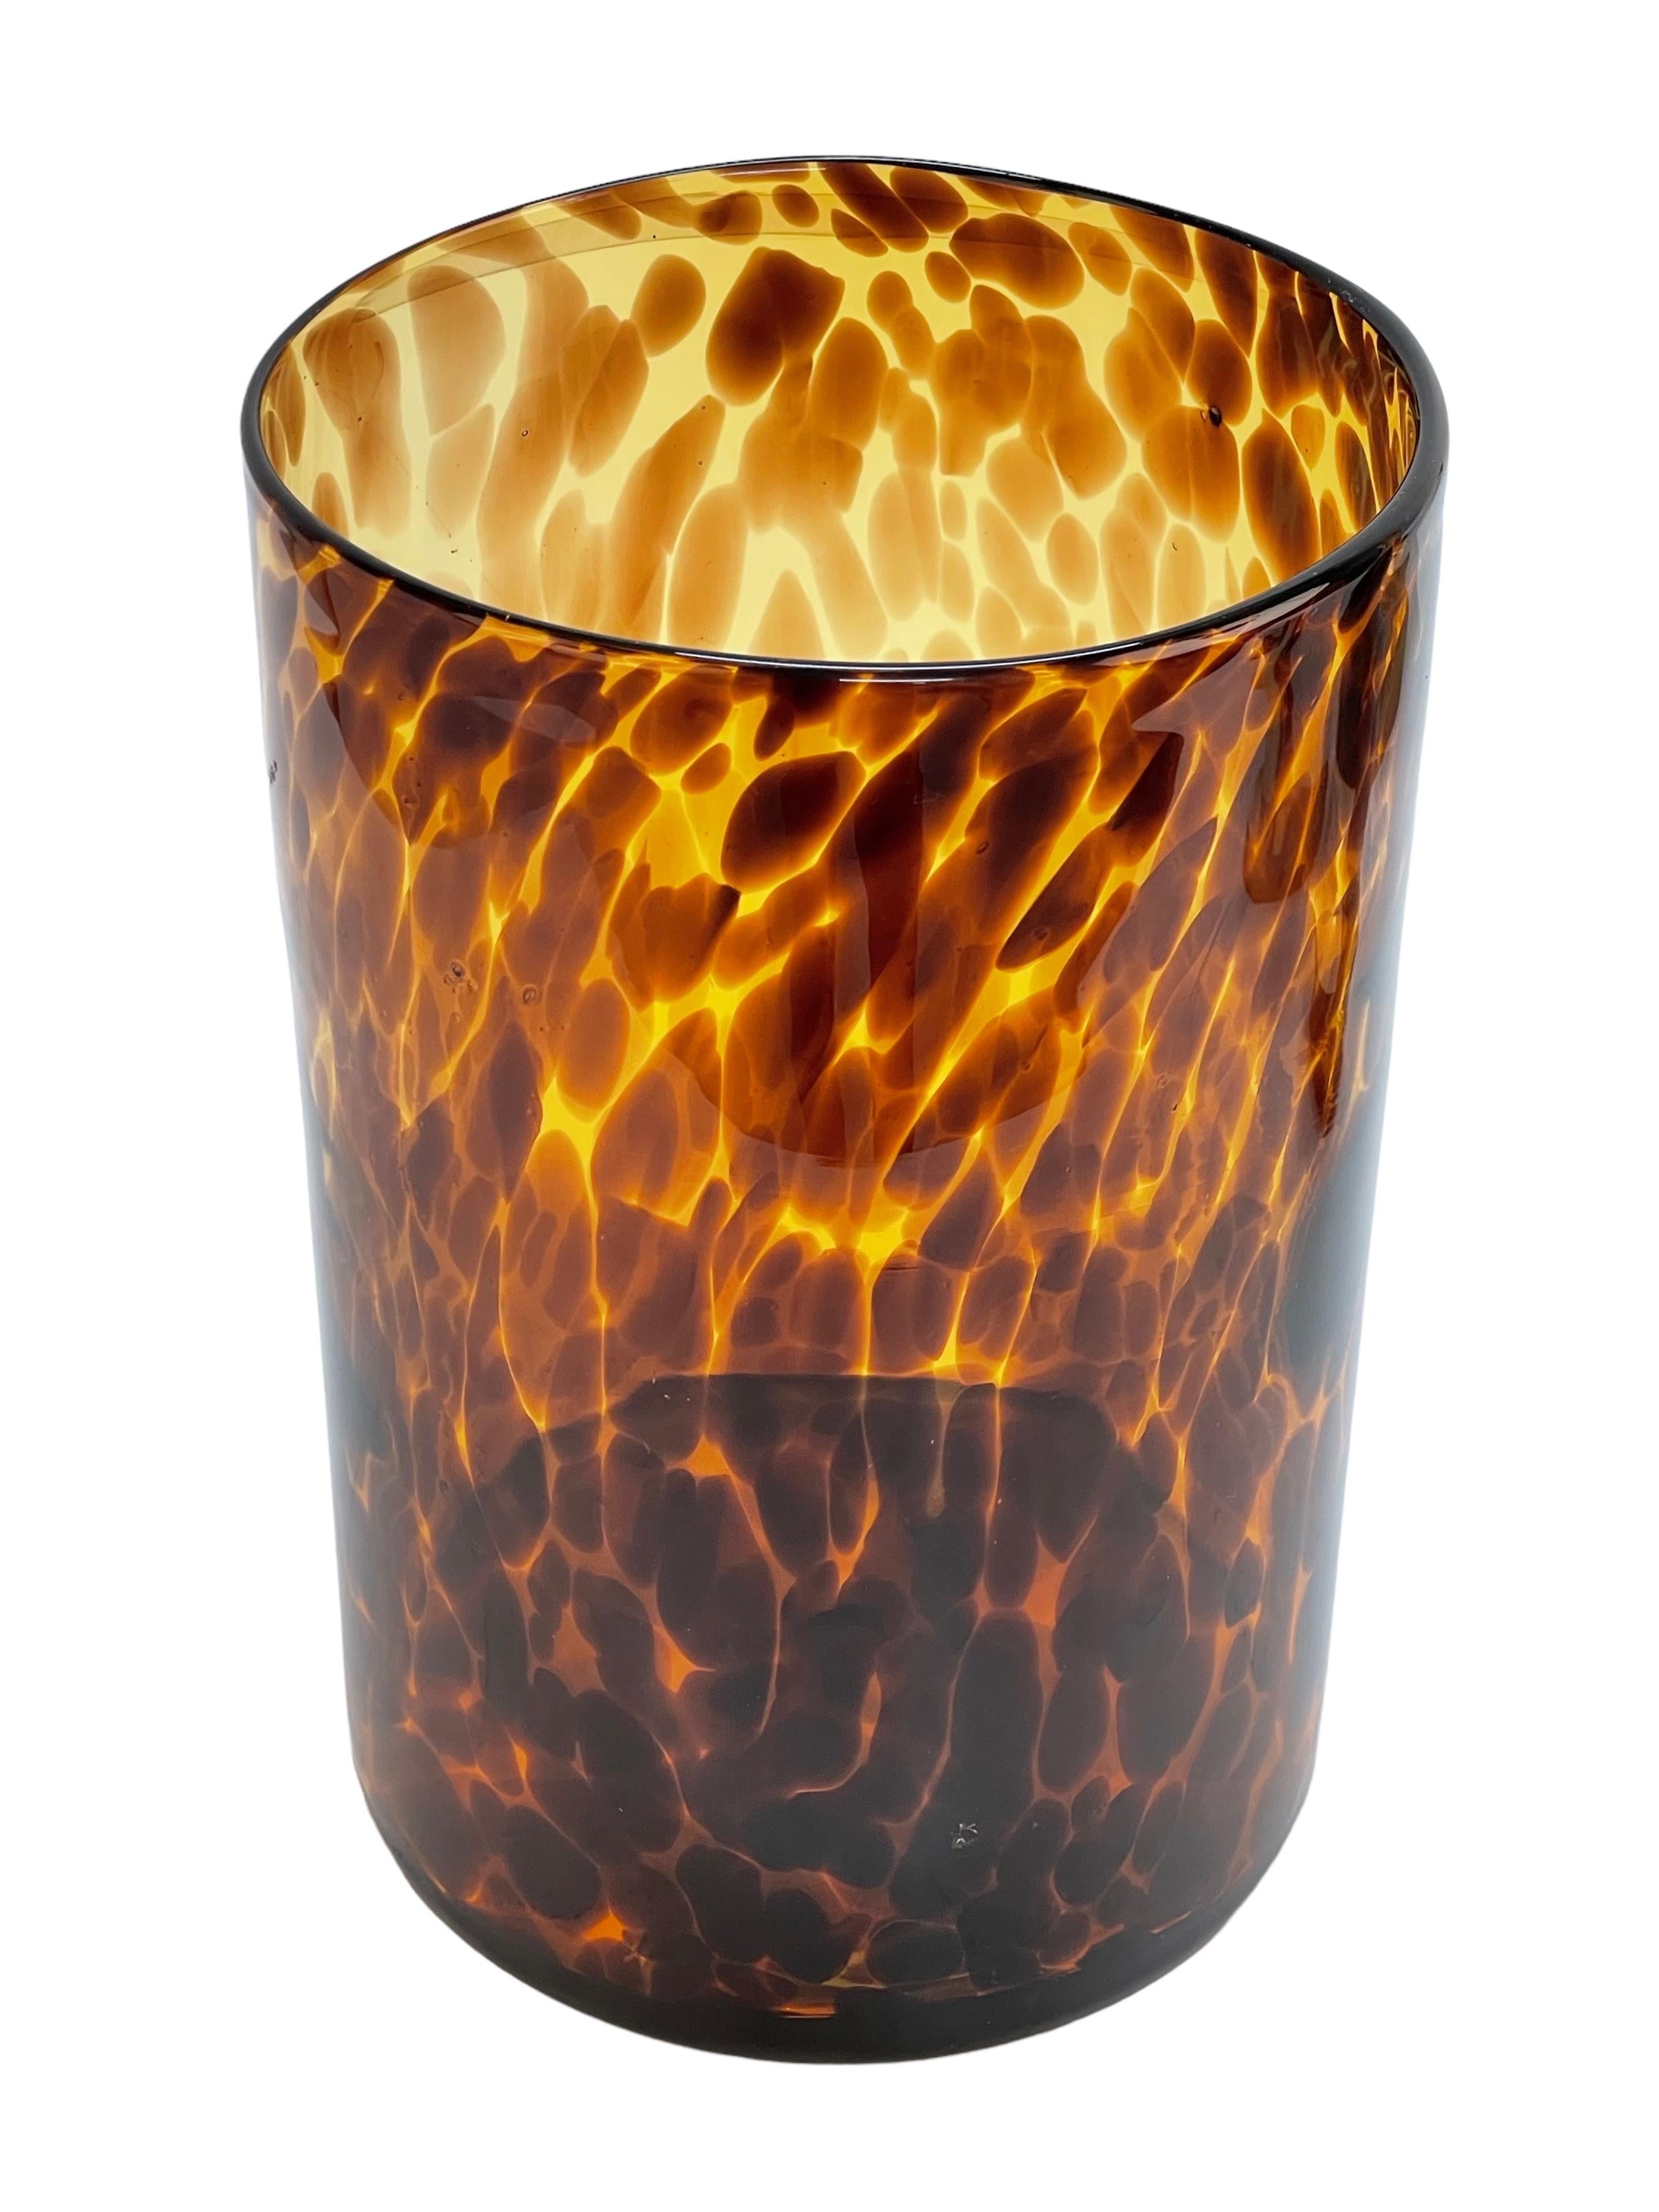 Midcentury Large Italian Orange and Brown Leopard Glass Artistic Vase, 1980s For Sale 10